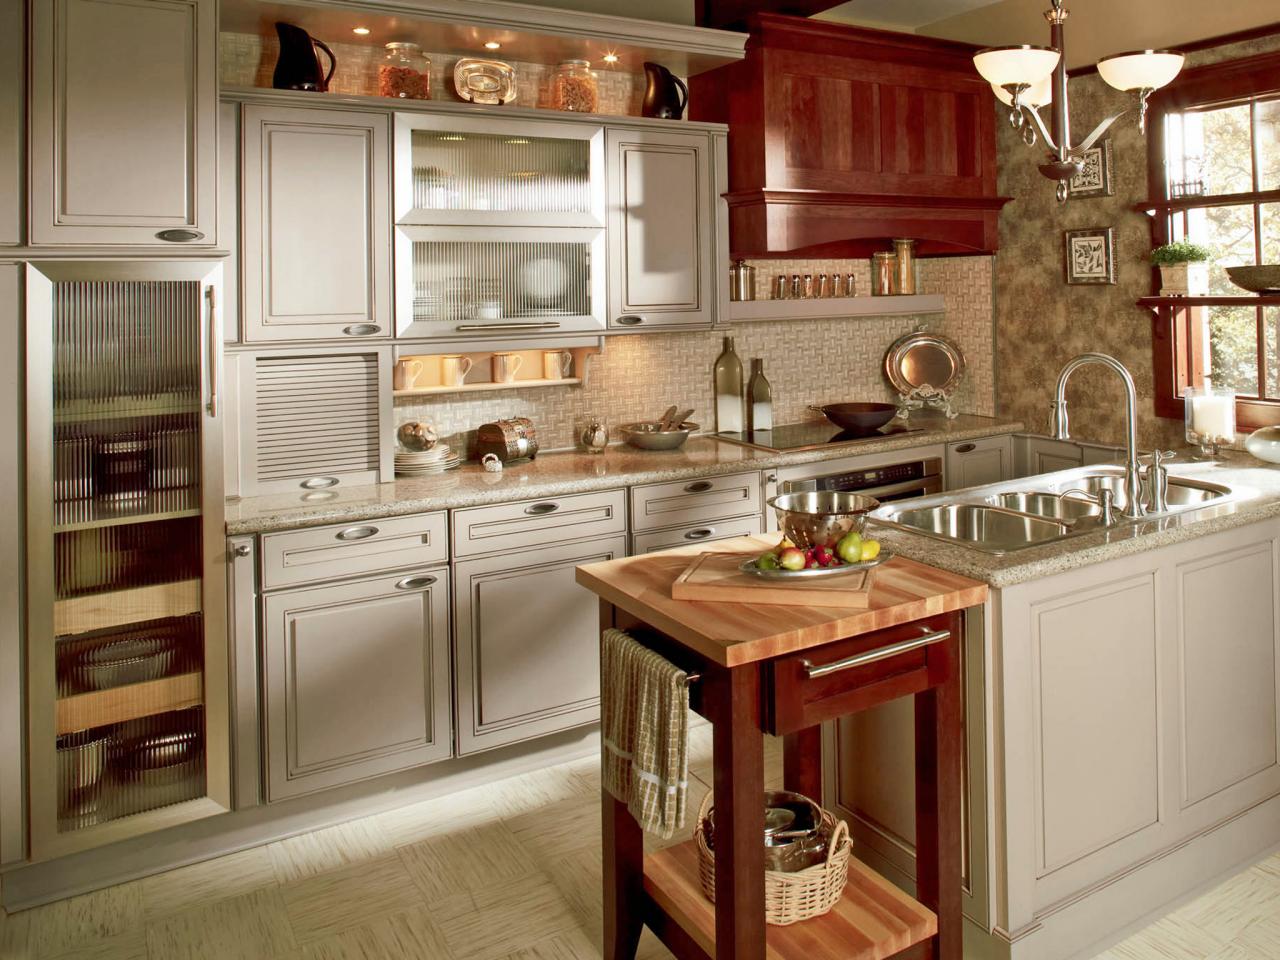 Kitchen Cabinet Prices Pictures, Ideas & Tips From HGTV   HGTV